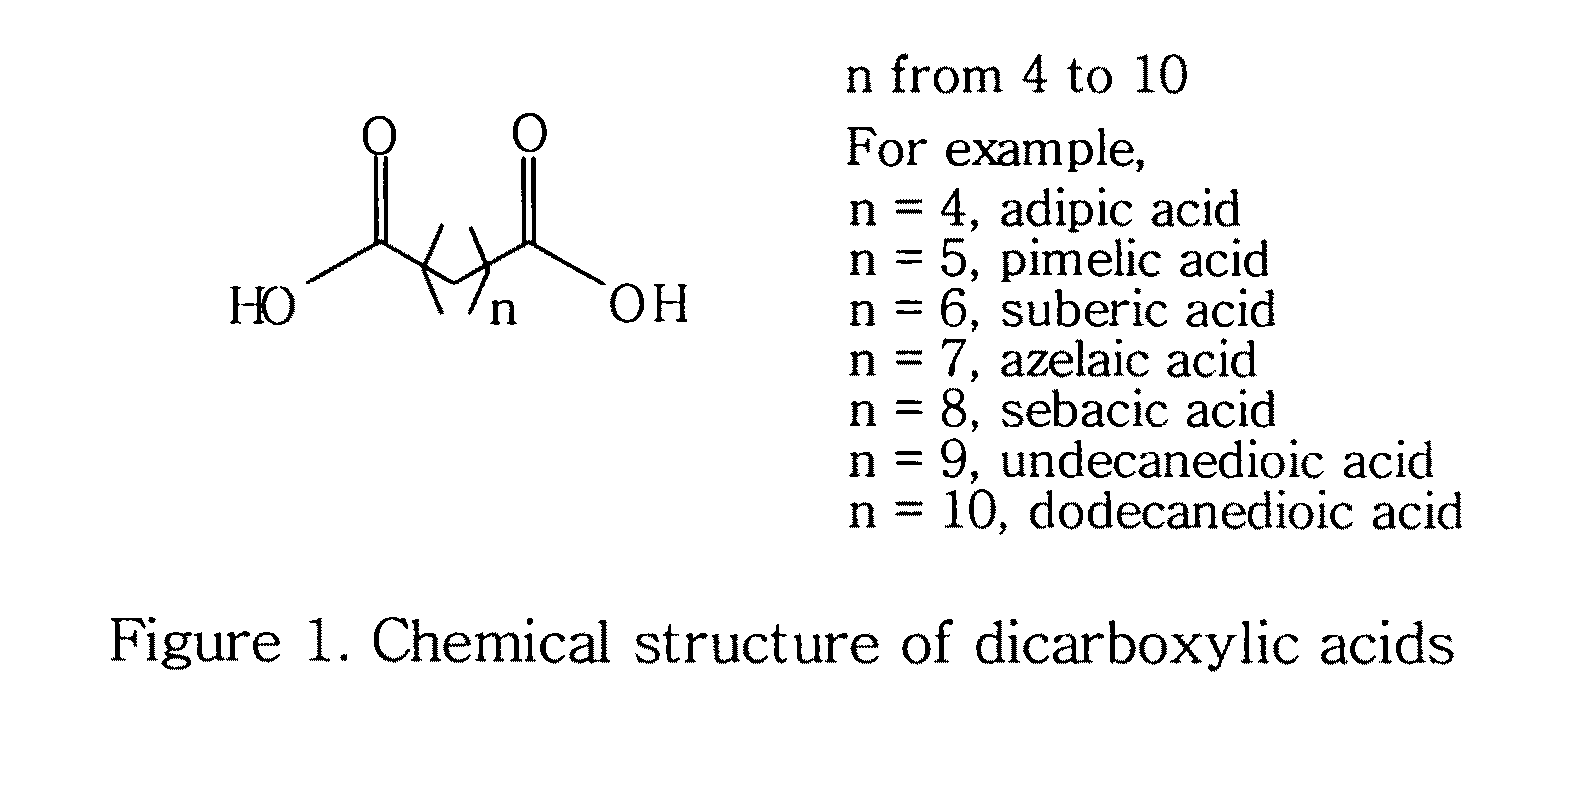 Topical compositions containing solubilized dicarboxylic acids